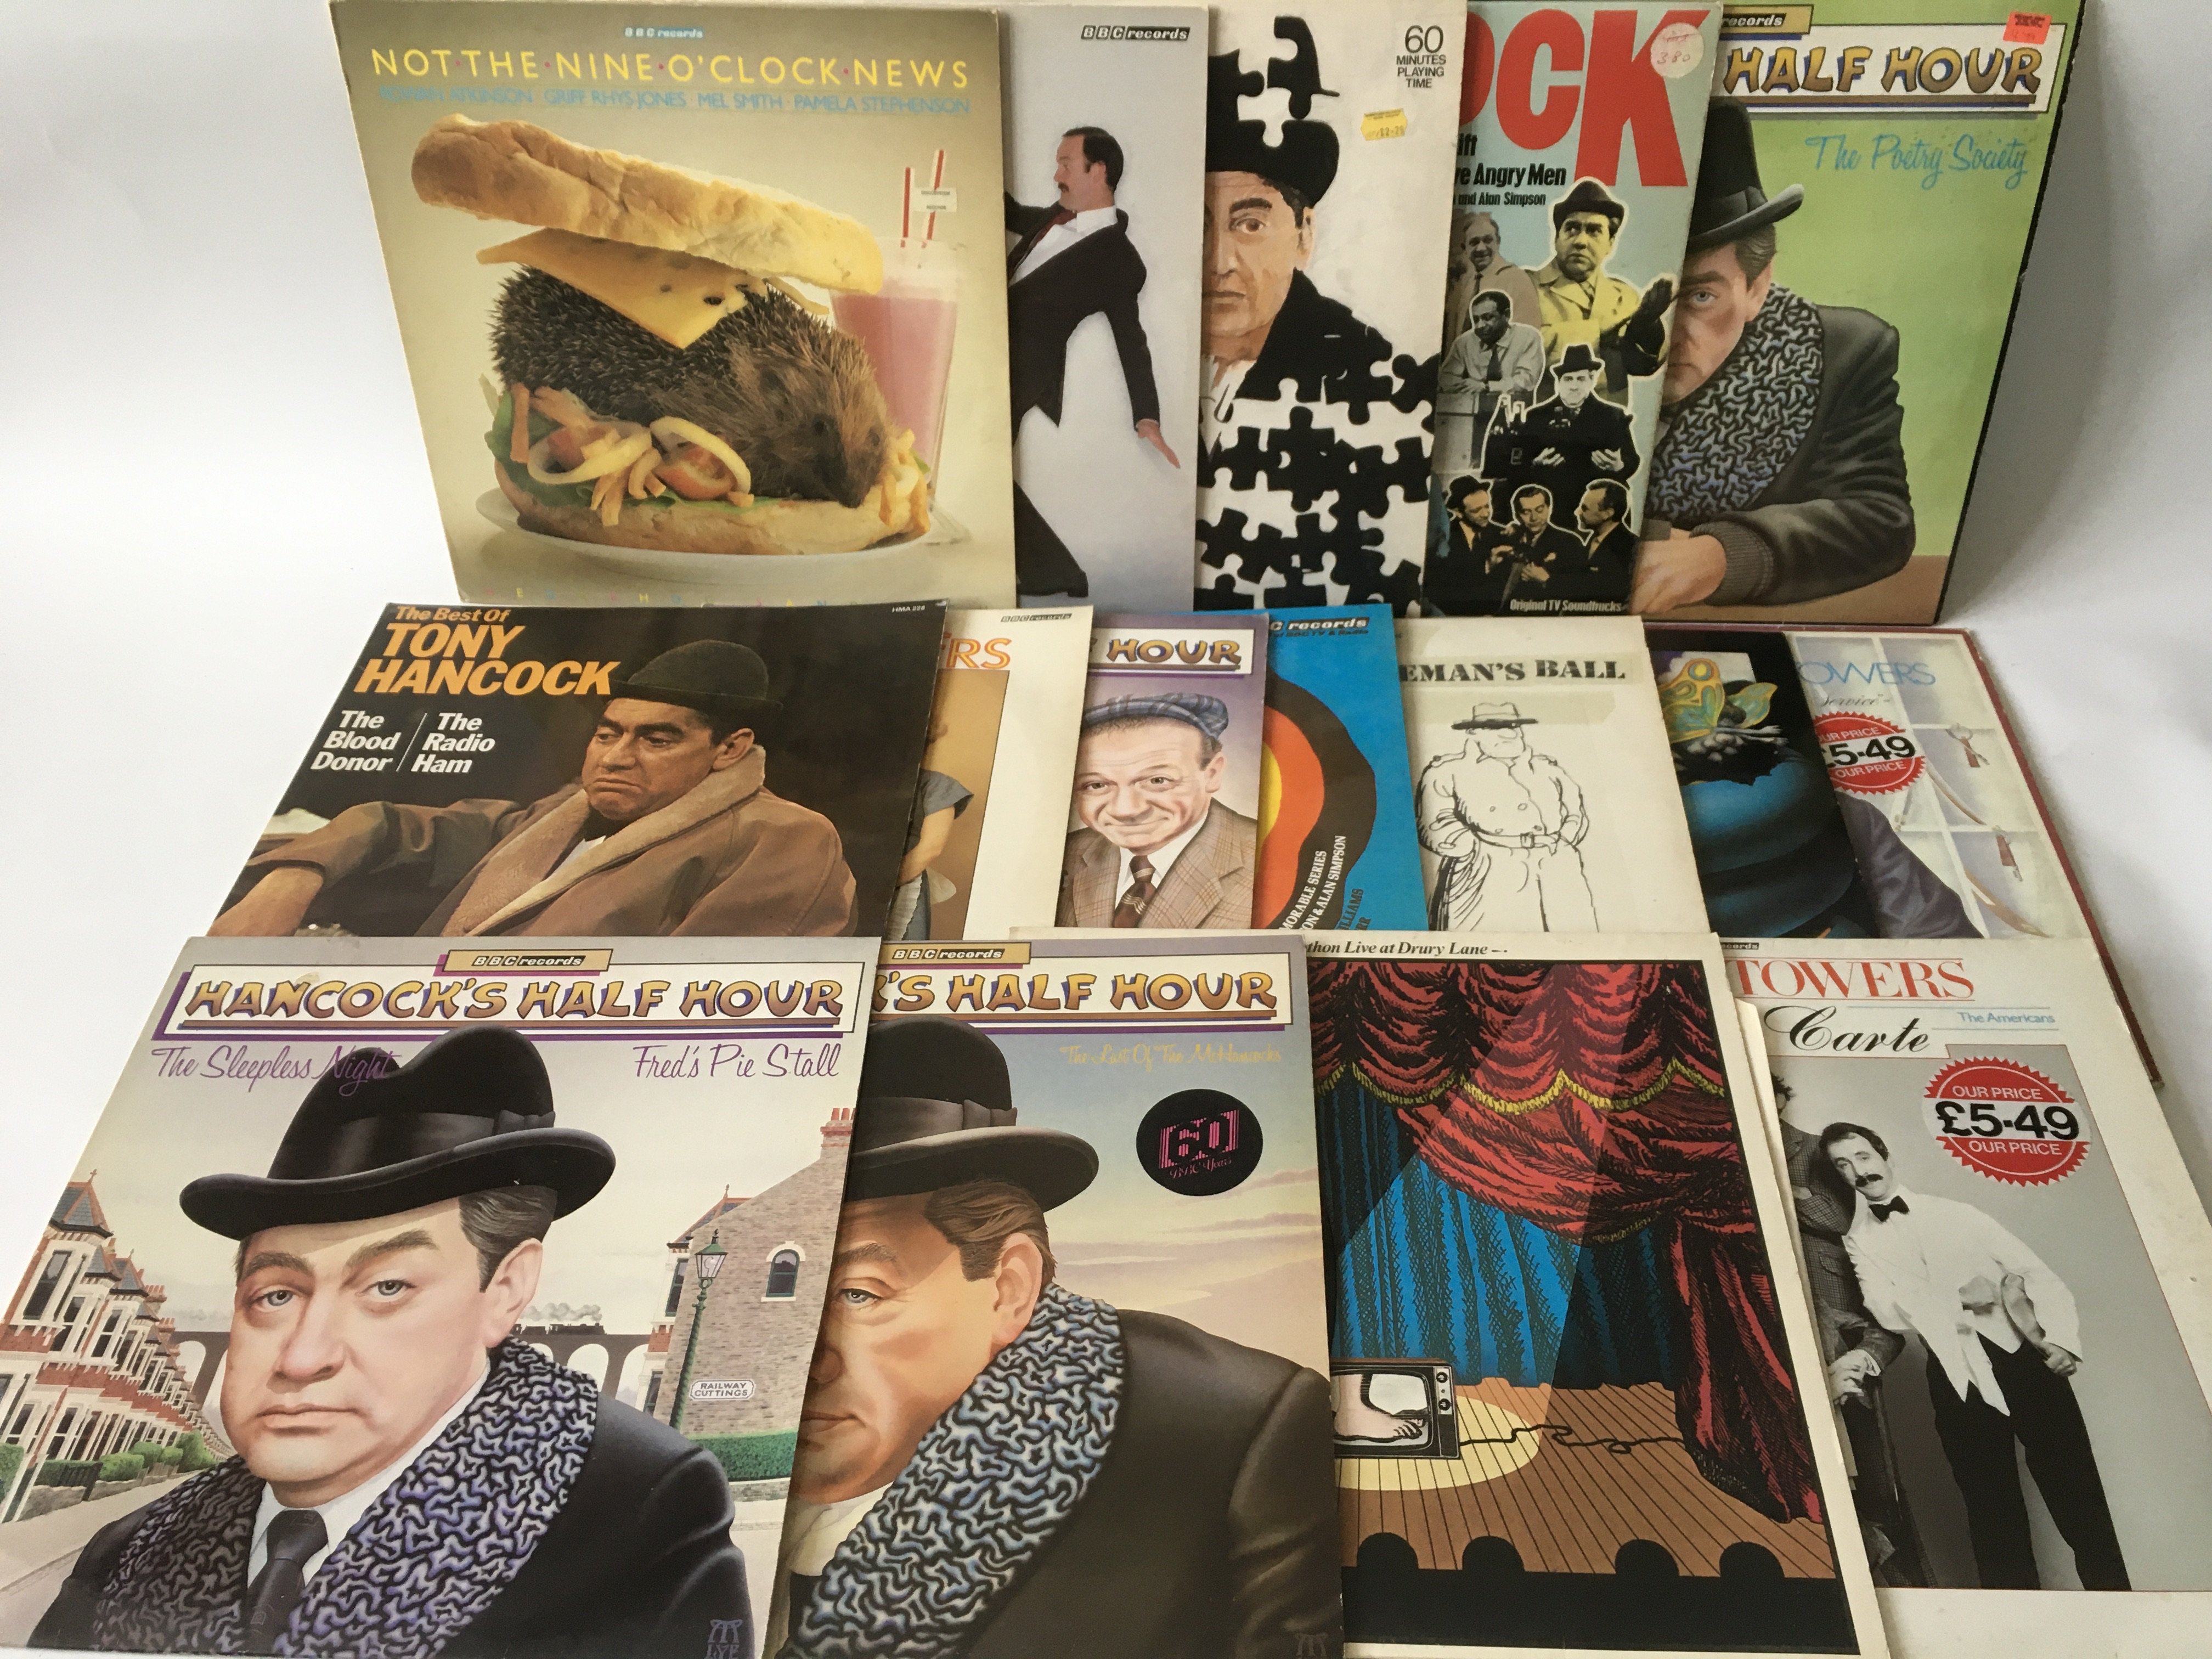 A collection of comedy LPs.